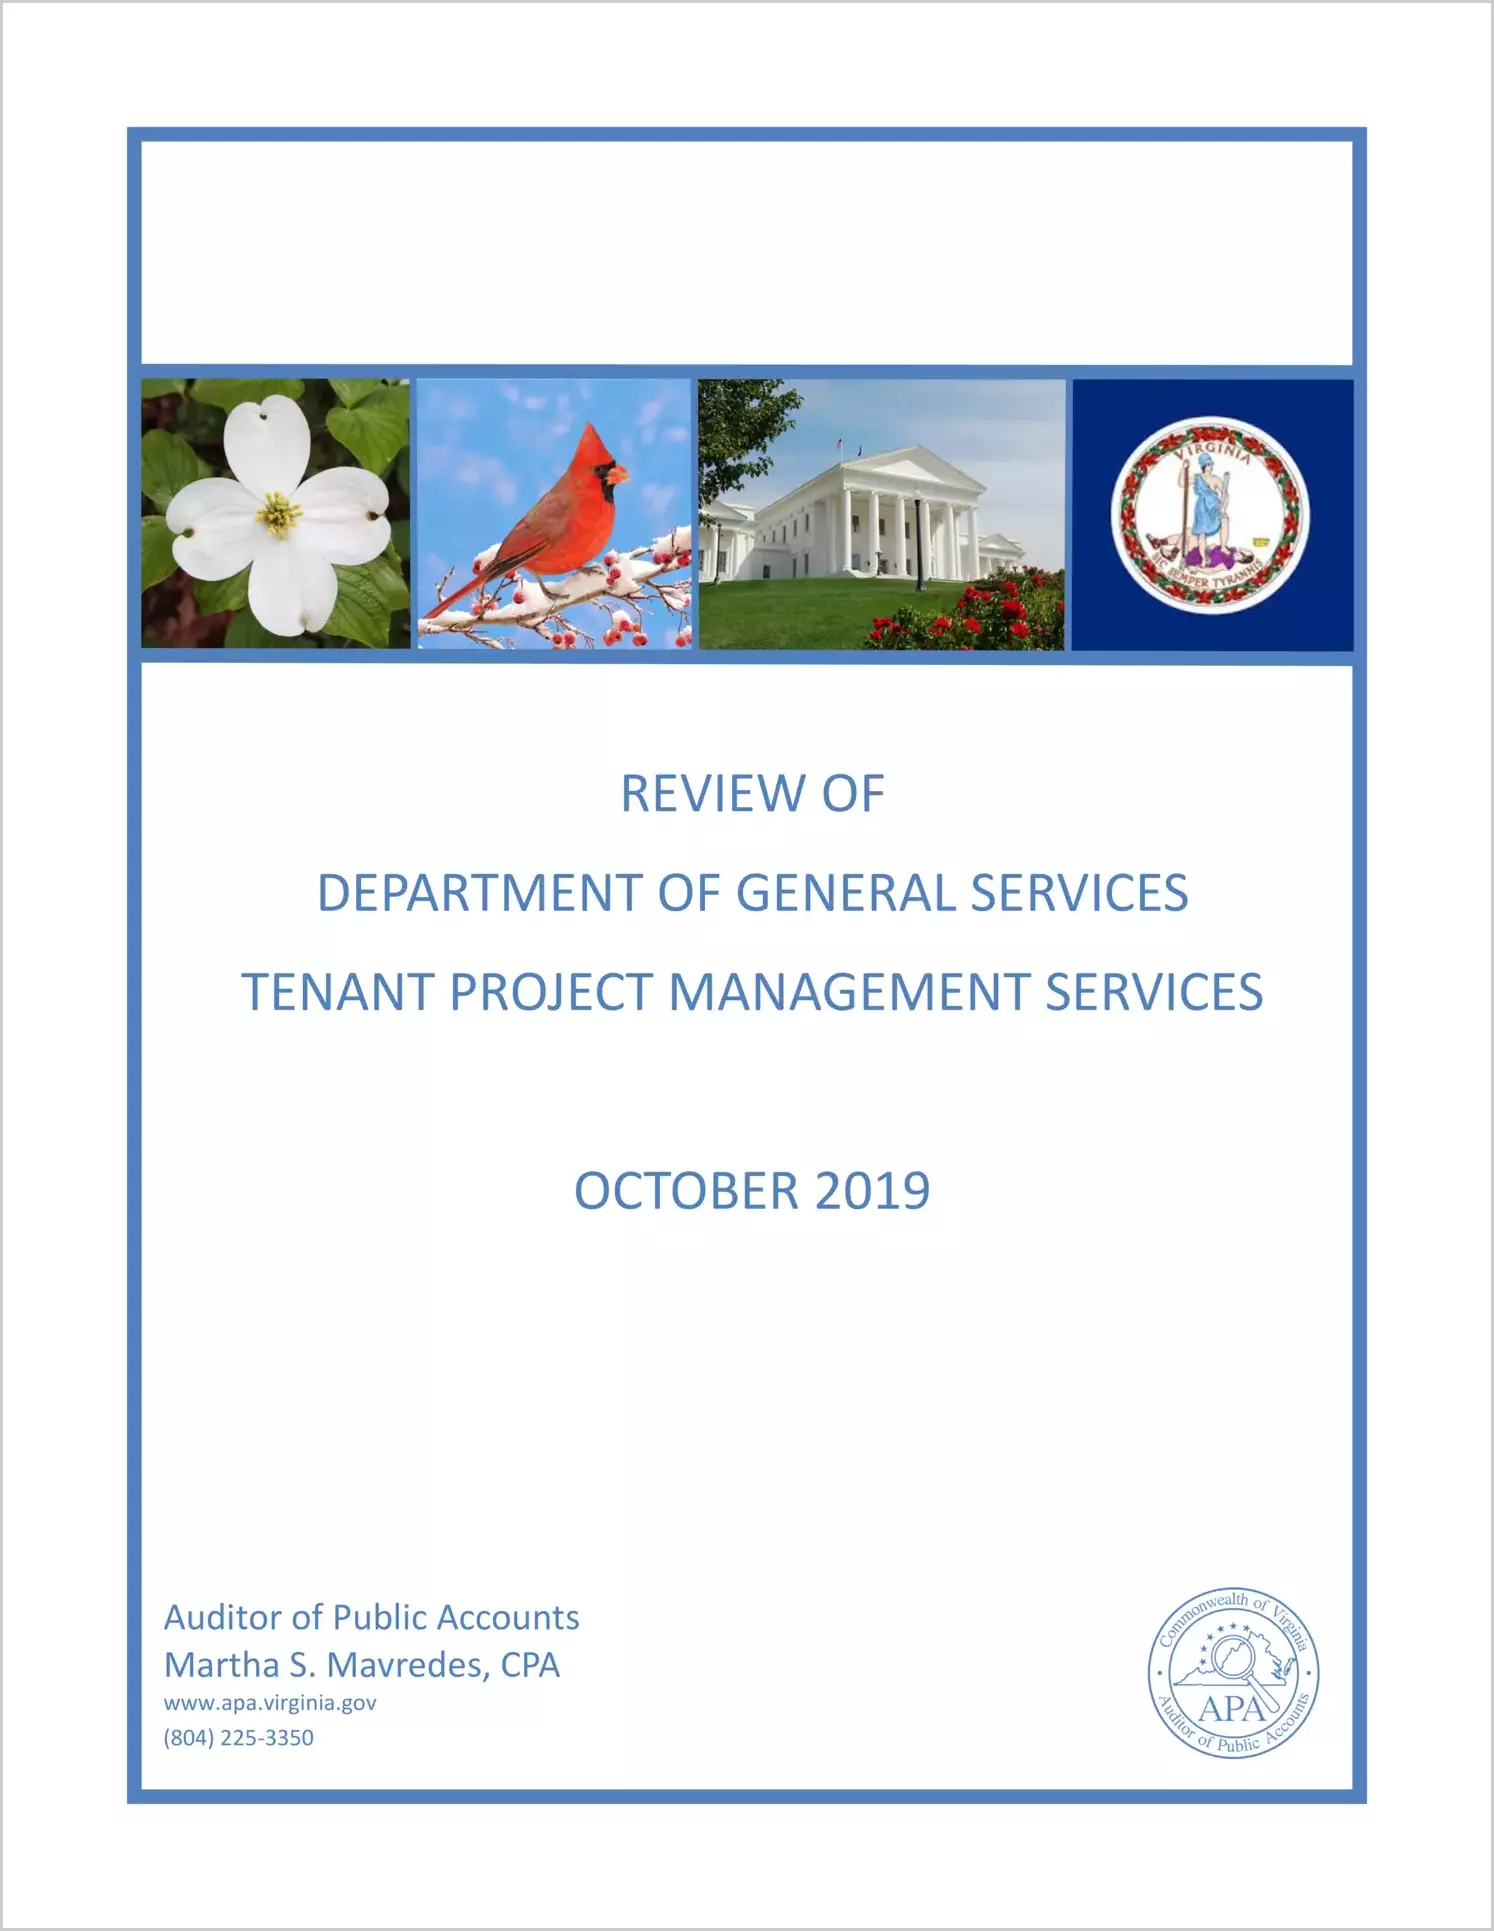 Review of the Department of General Services Tenant Project Management Services October 2019